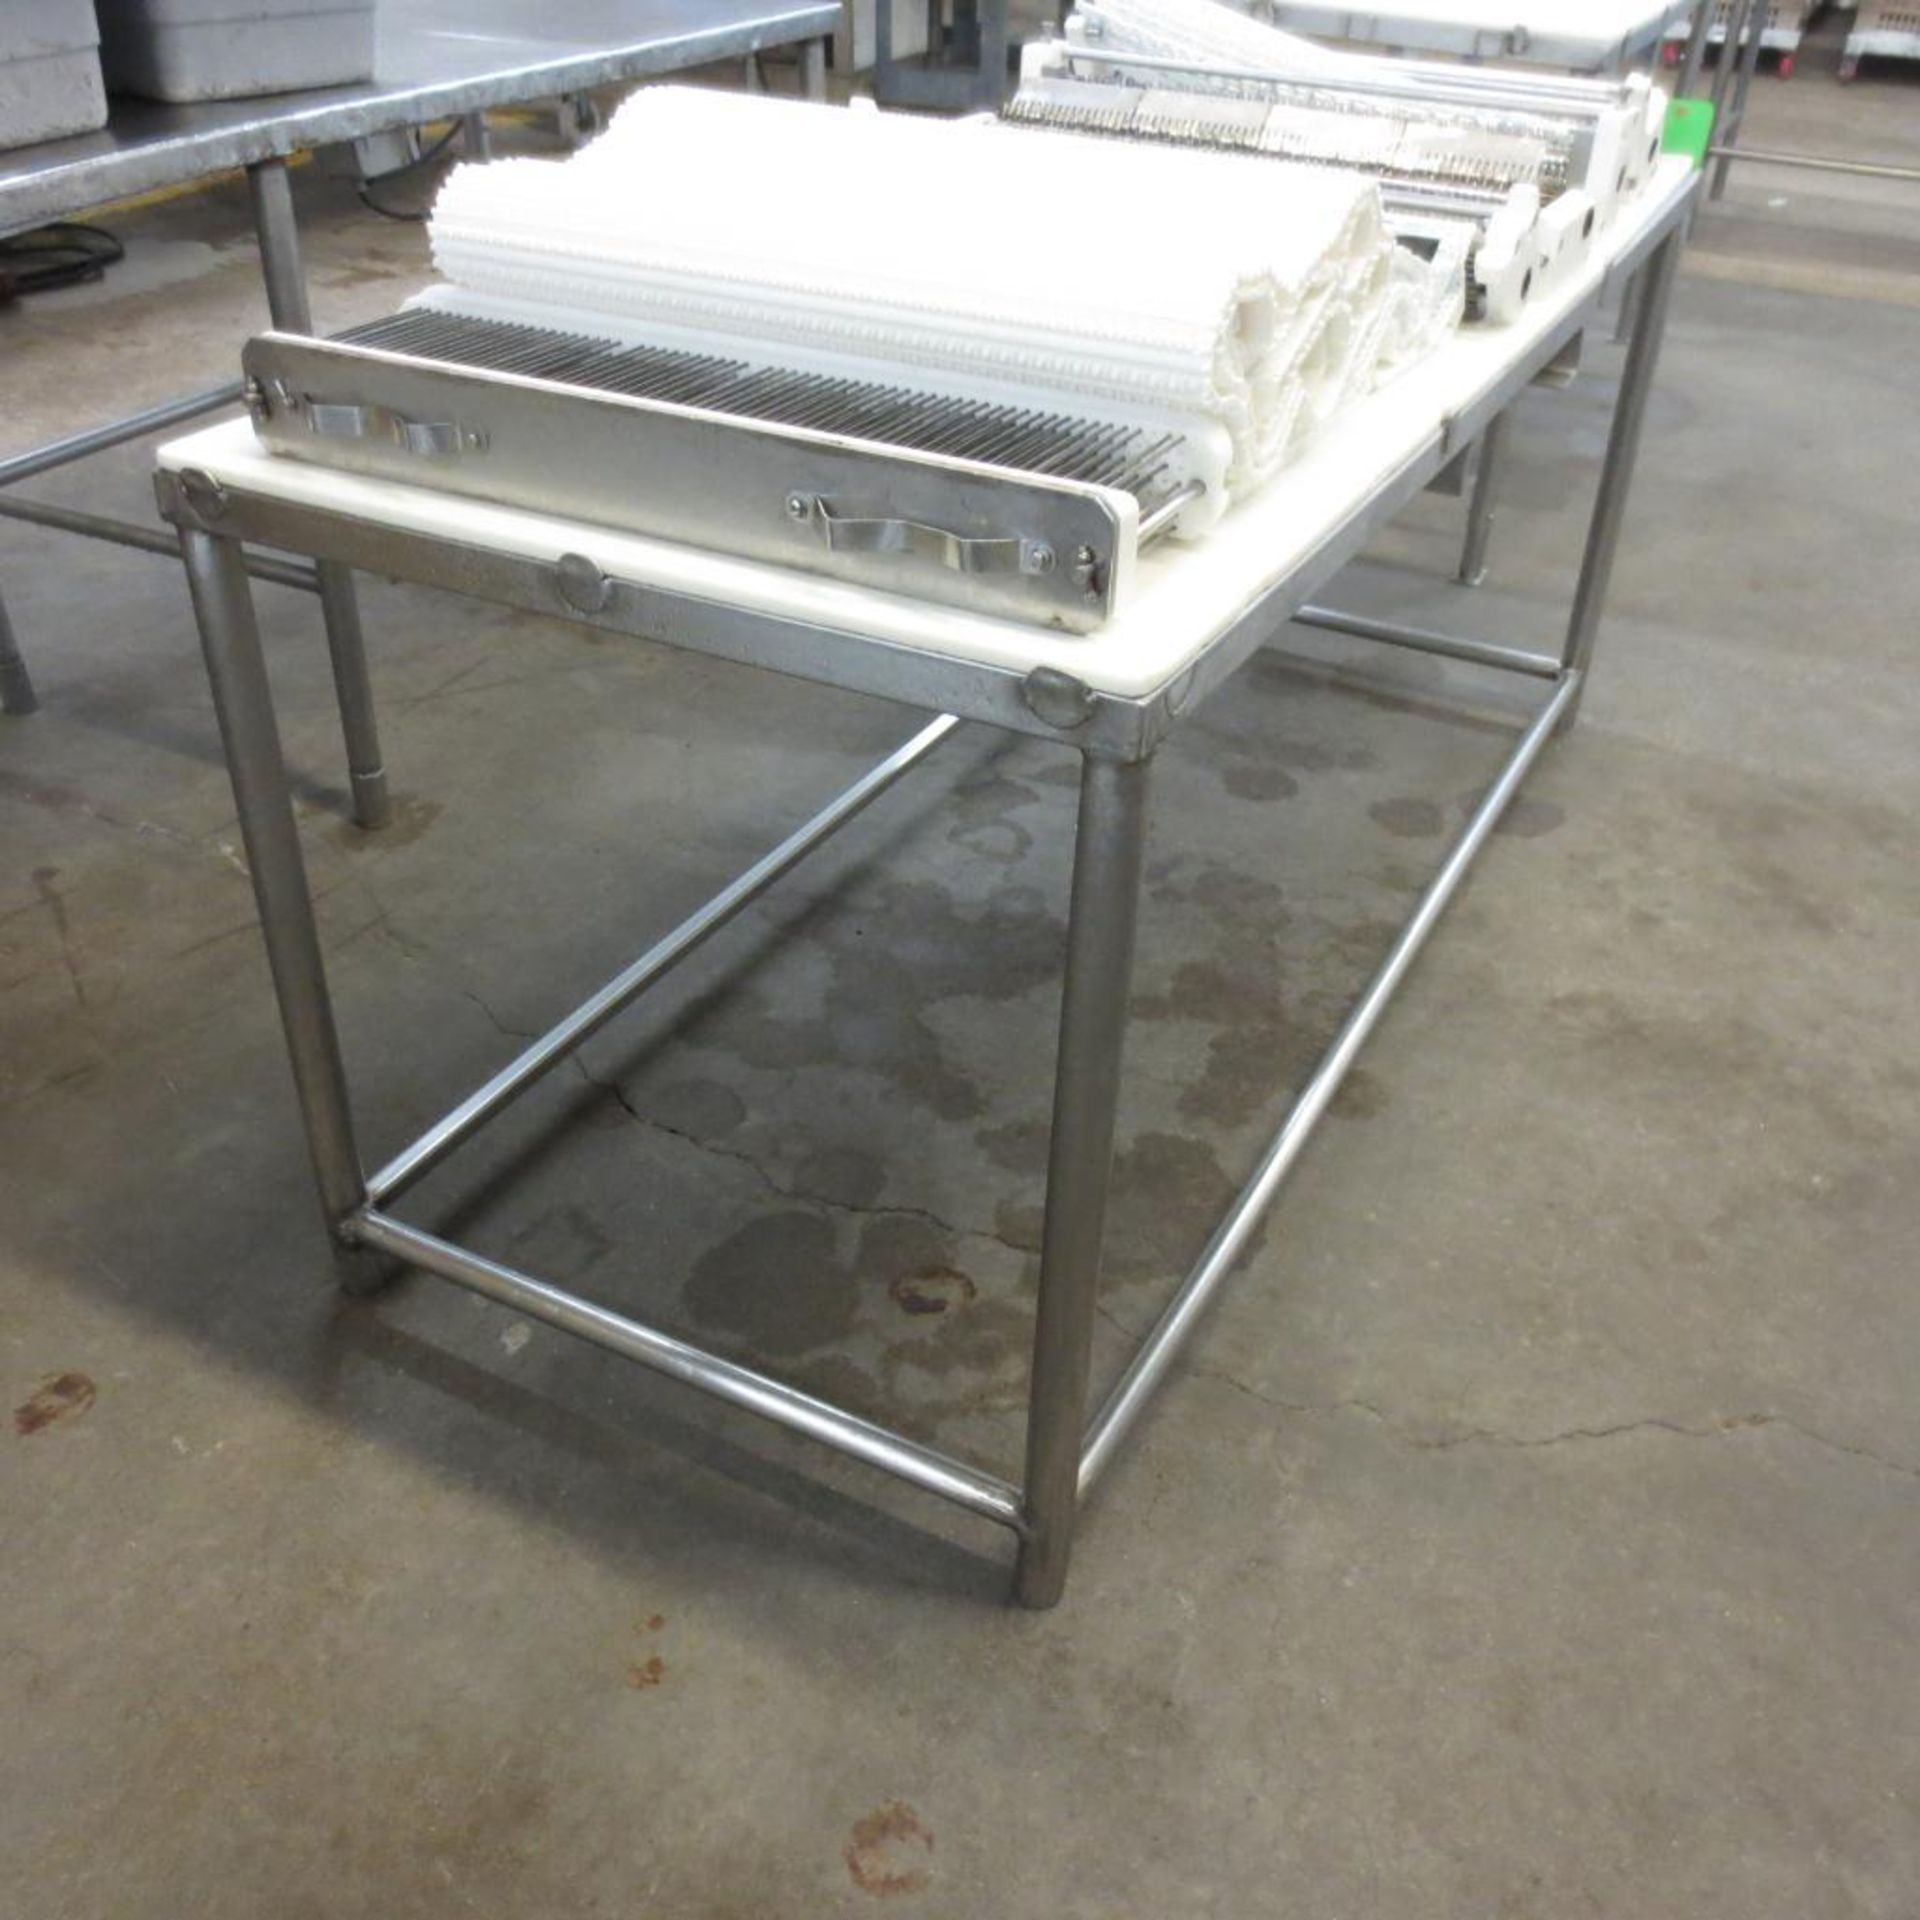 72" X 30" Stainless Table Frame with (3) 30" X 24" Cutting Board Table Tops ( No Contents ) - Image 2 of 2